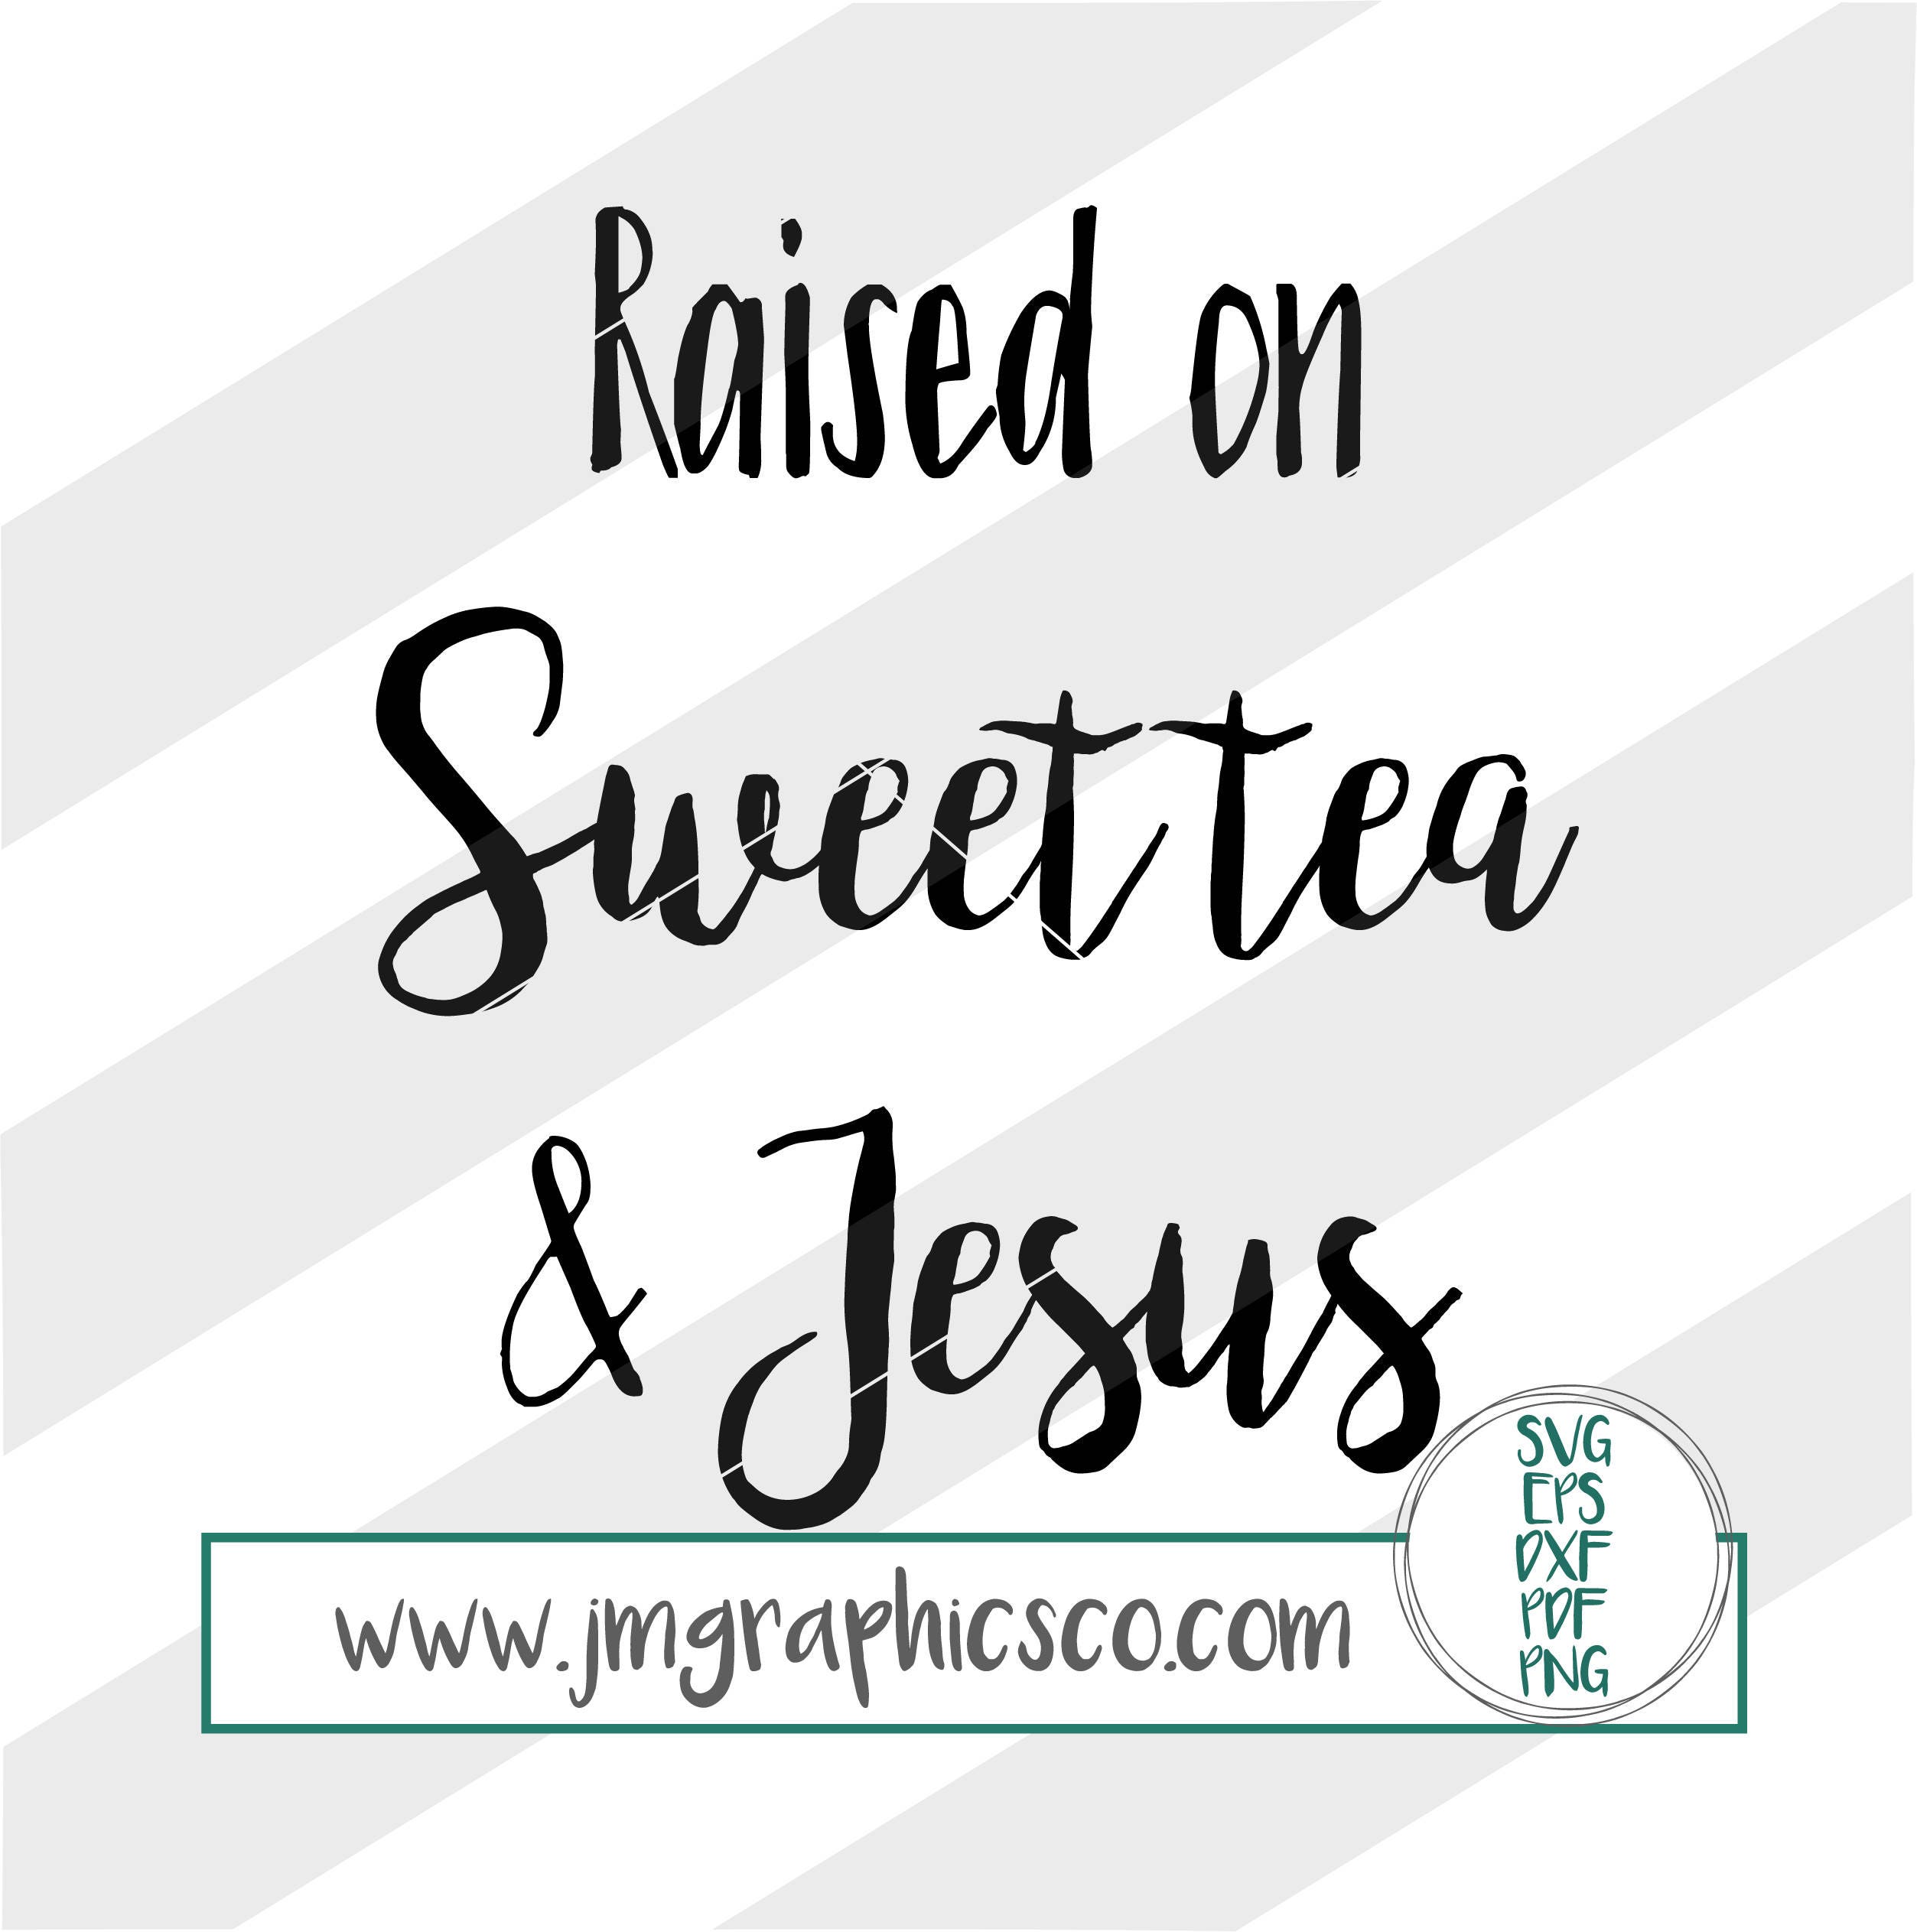 Download Raised on sweet tea and Jesus svg eps dxf png cricut or